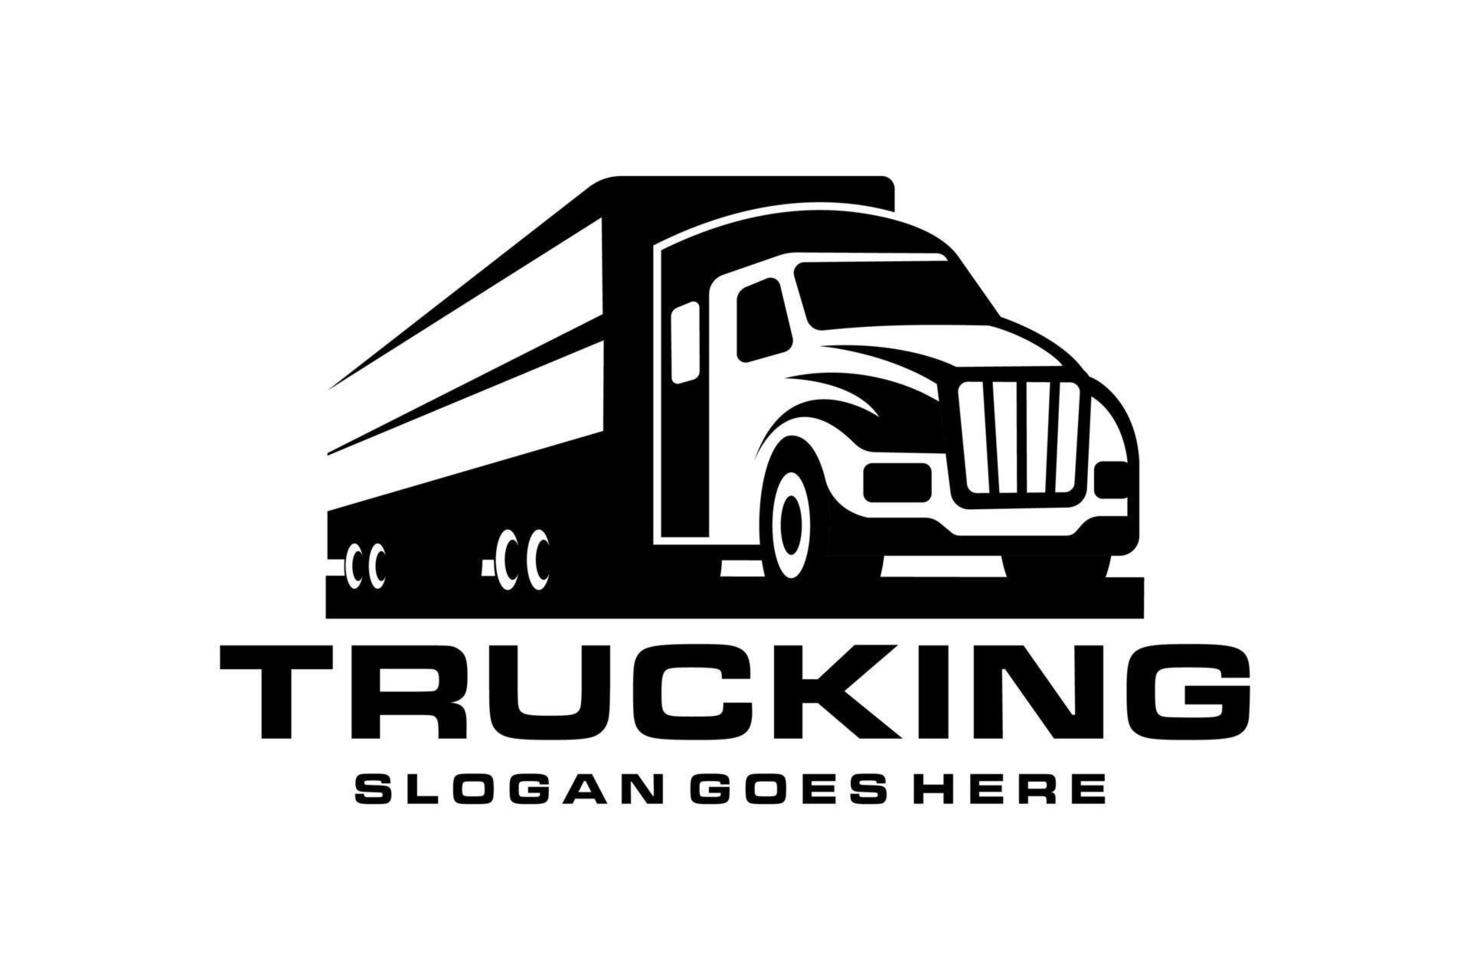 Trucking logo template, logo with truck on white background, monochrome style vector